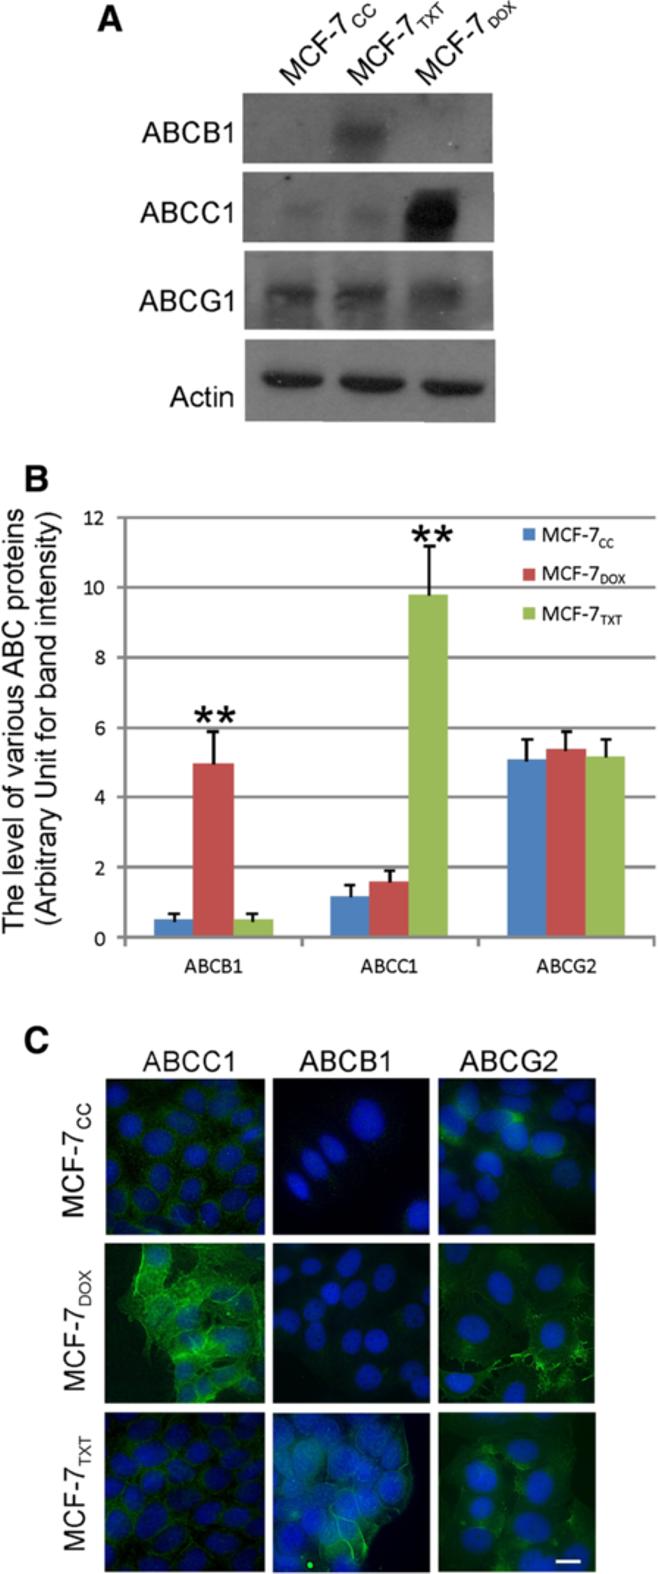 Wang et al. BMC Cancer 2014, 14:37 Page 6 of 15 Figure 2 The expression and localization of ABC proteins.